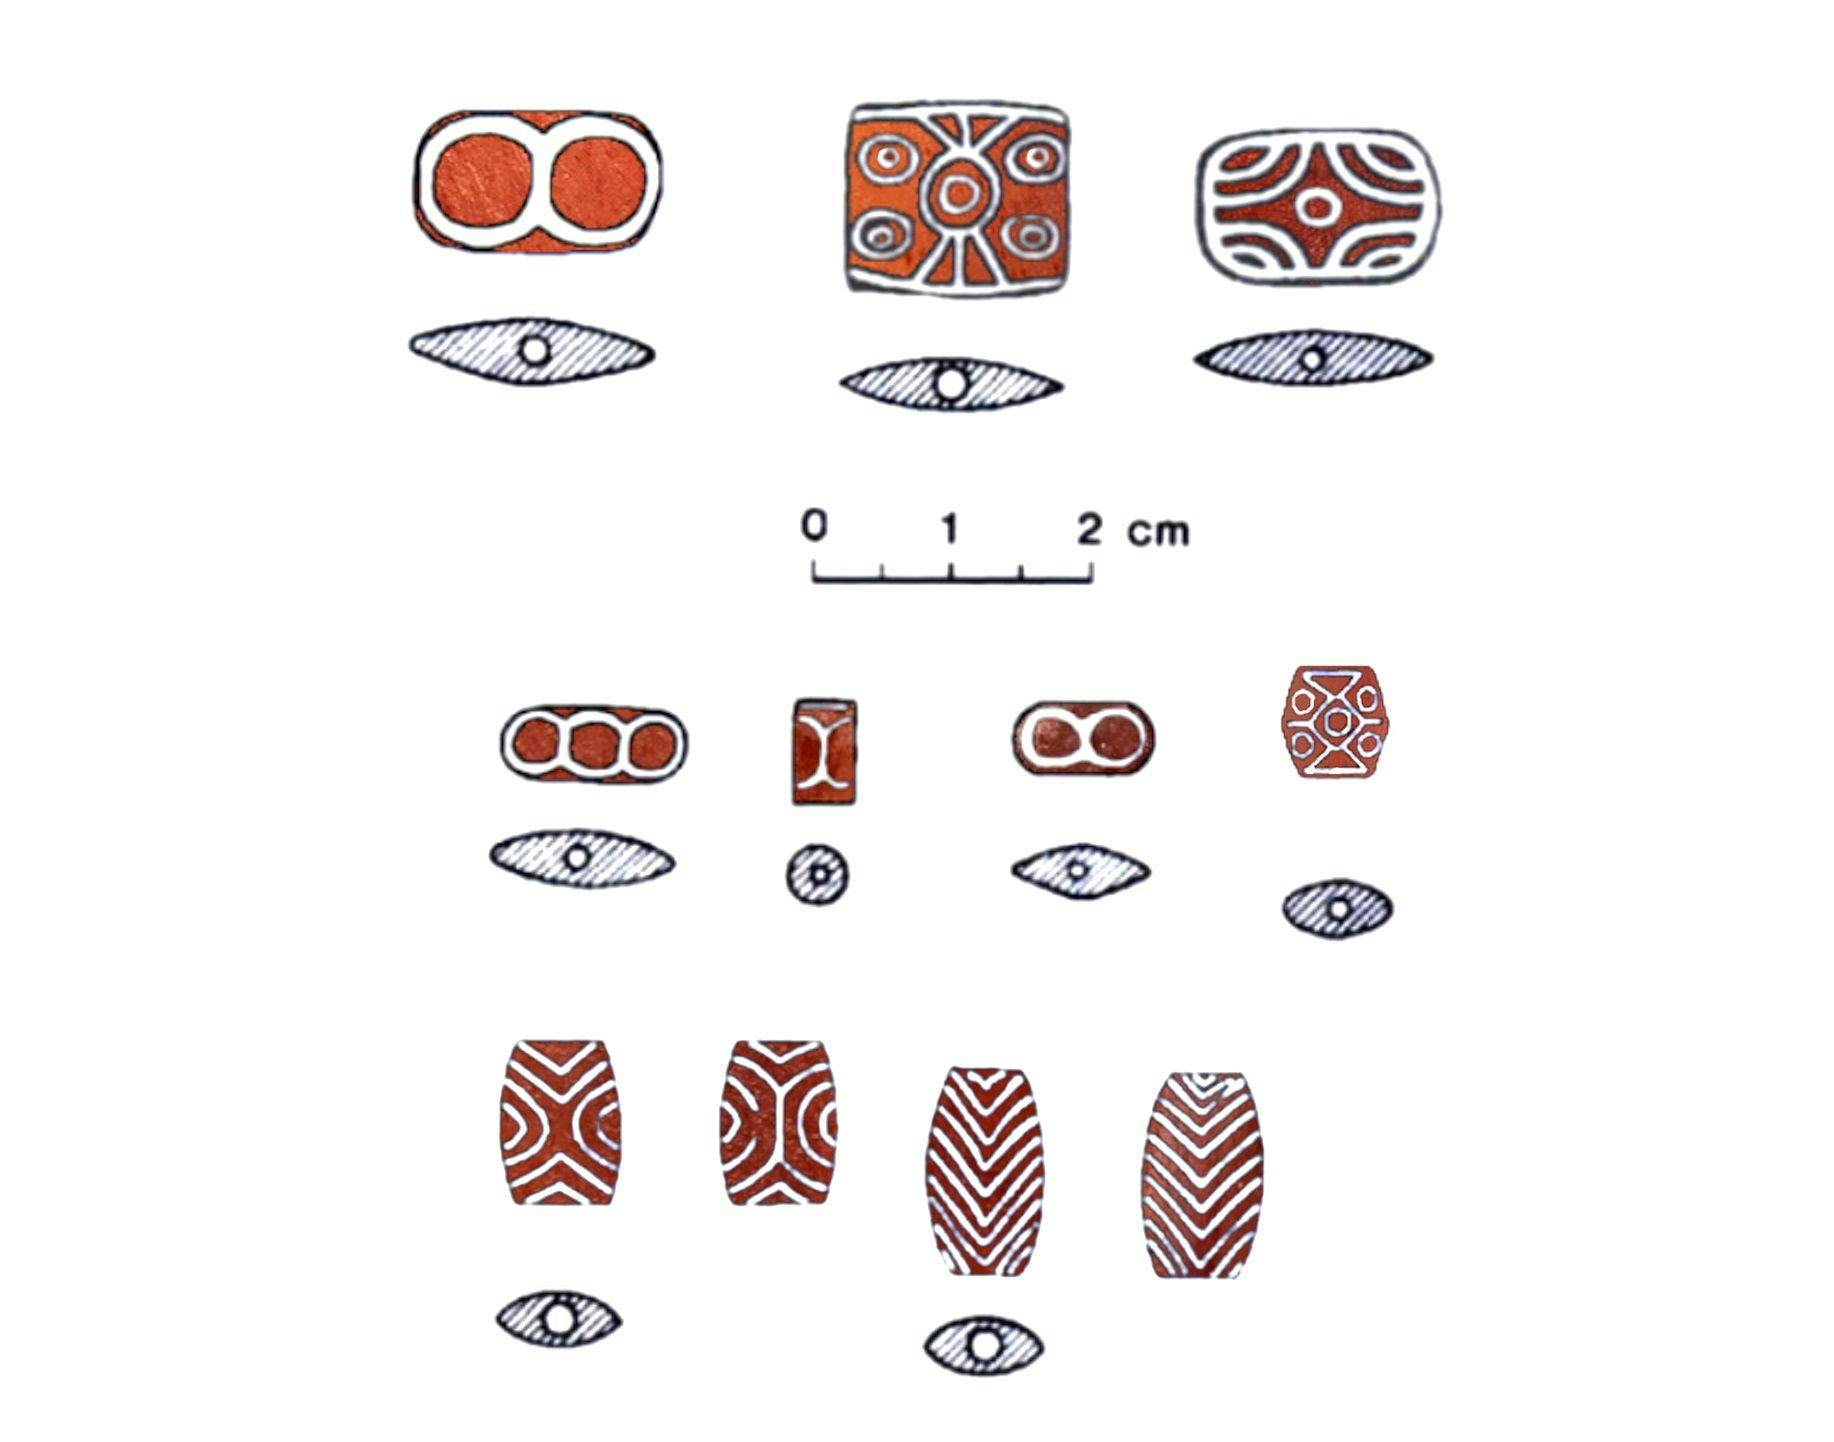 Illustration of etched carnelian beads after Mackay